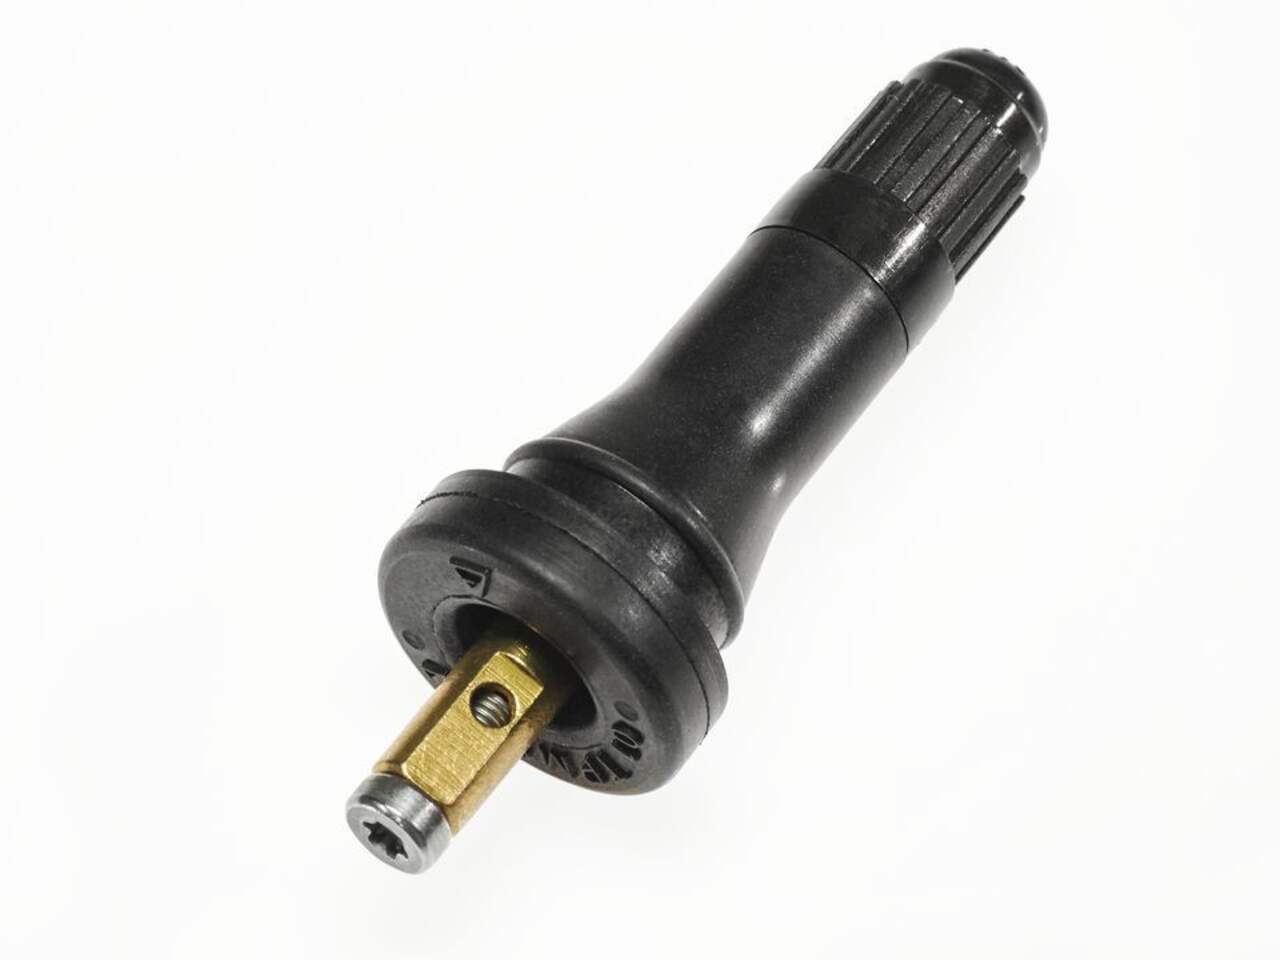 https://media-www.canadiantire.ca/product/automotive/tires/wheels-and-accessories/0094702/huf-tire-pressure-rubber-valve-stem-a7b1201f-890a-4961-8b37-944236384f8e-jpgrendition.jpg?imdensity=1&imwidth=640&impolicy=mZoom